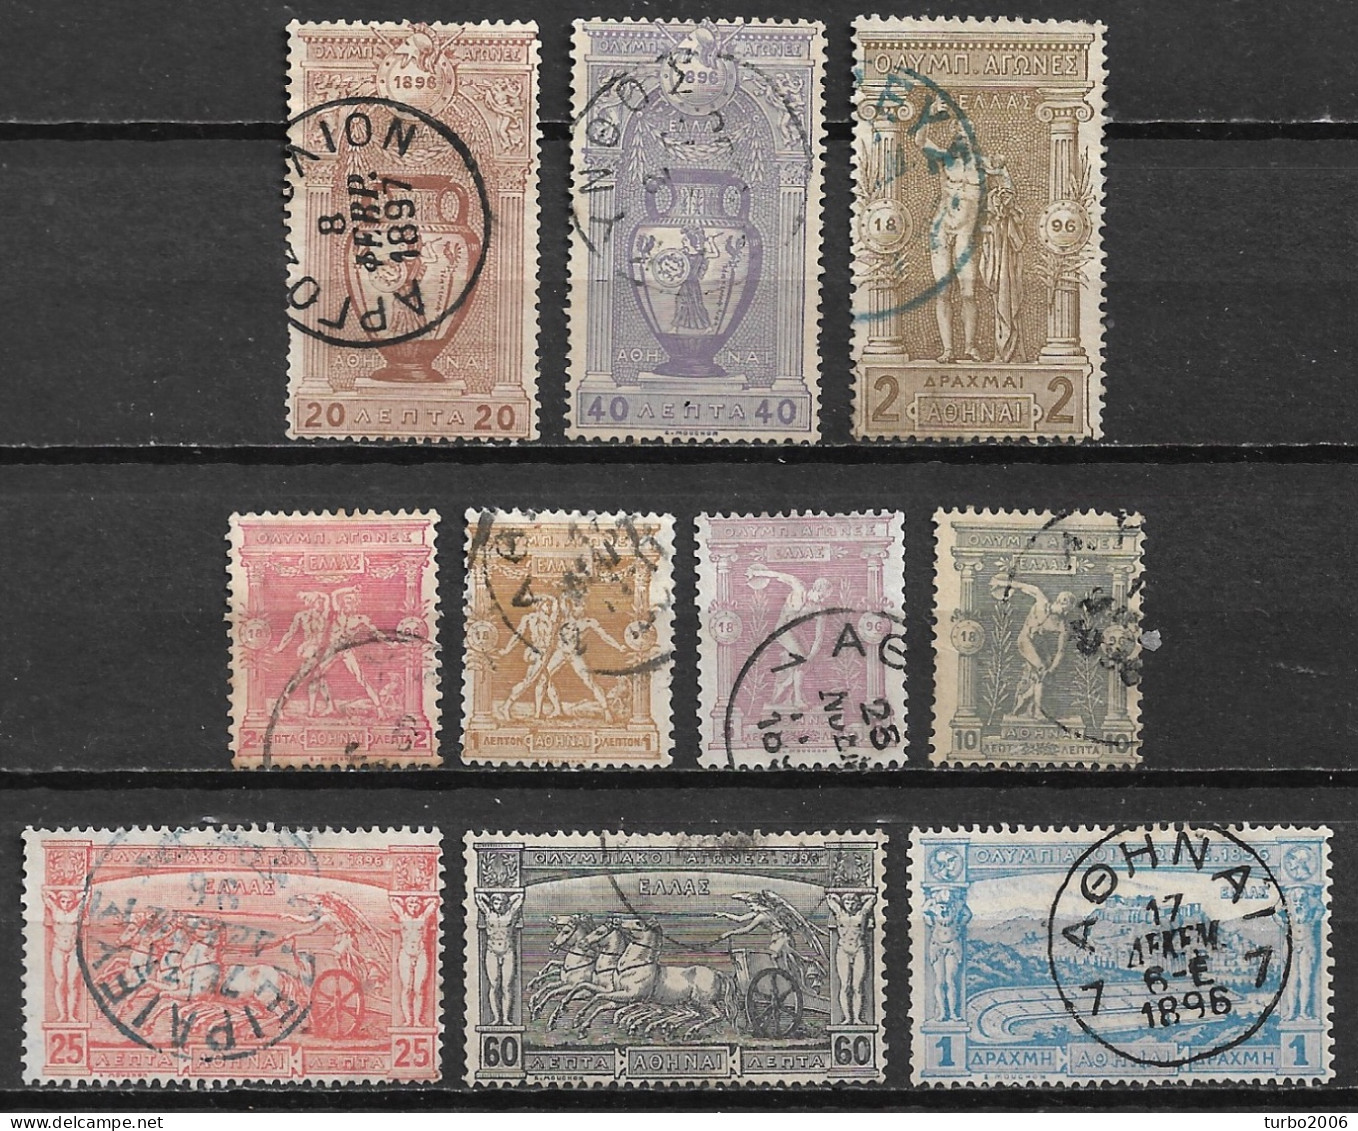 GREECE 1896 First Olympic Games Set To 2 Dr. Vl. 133 / 142 - Used Stamps